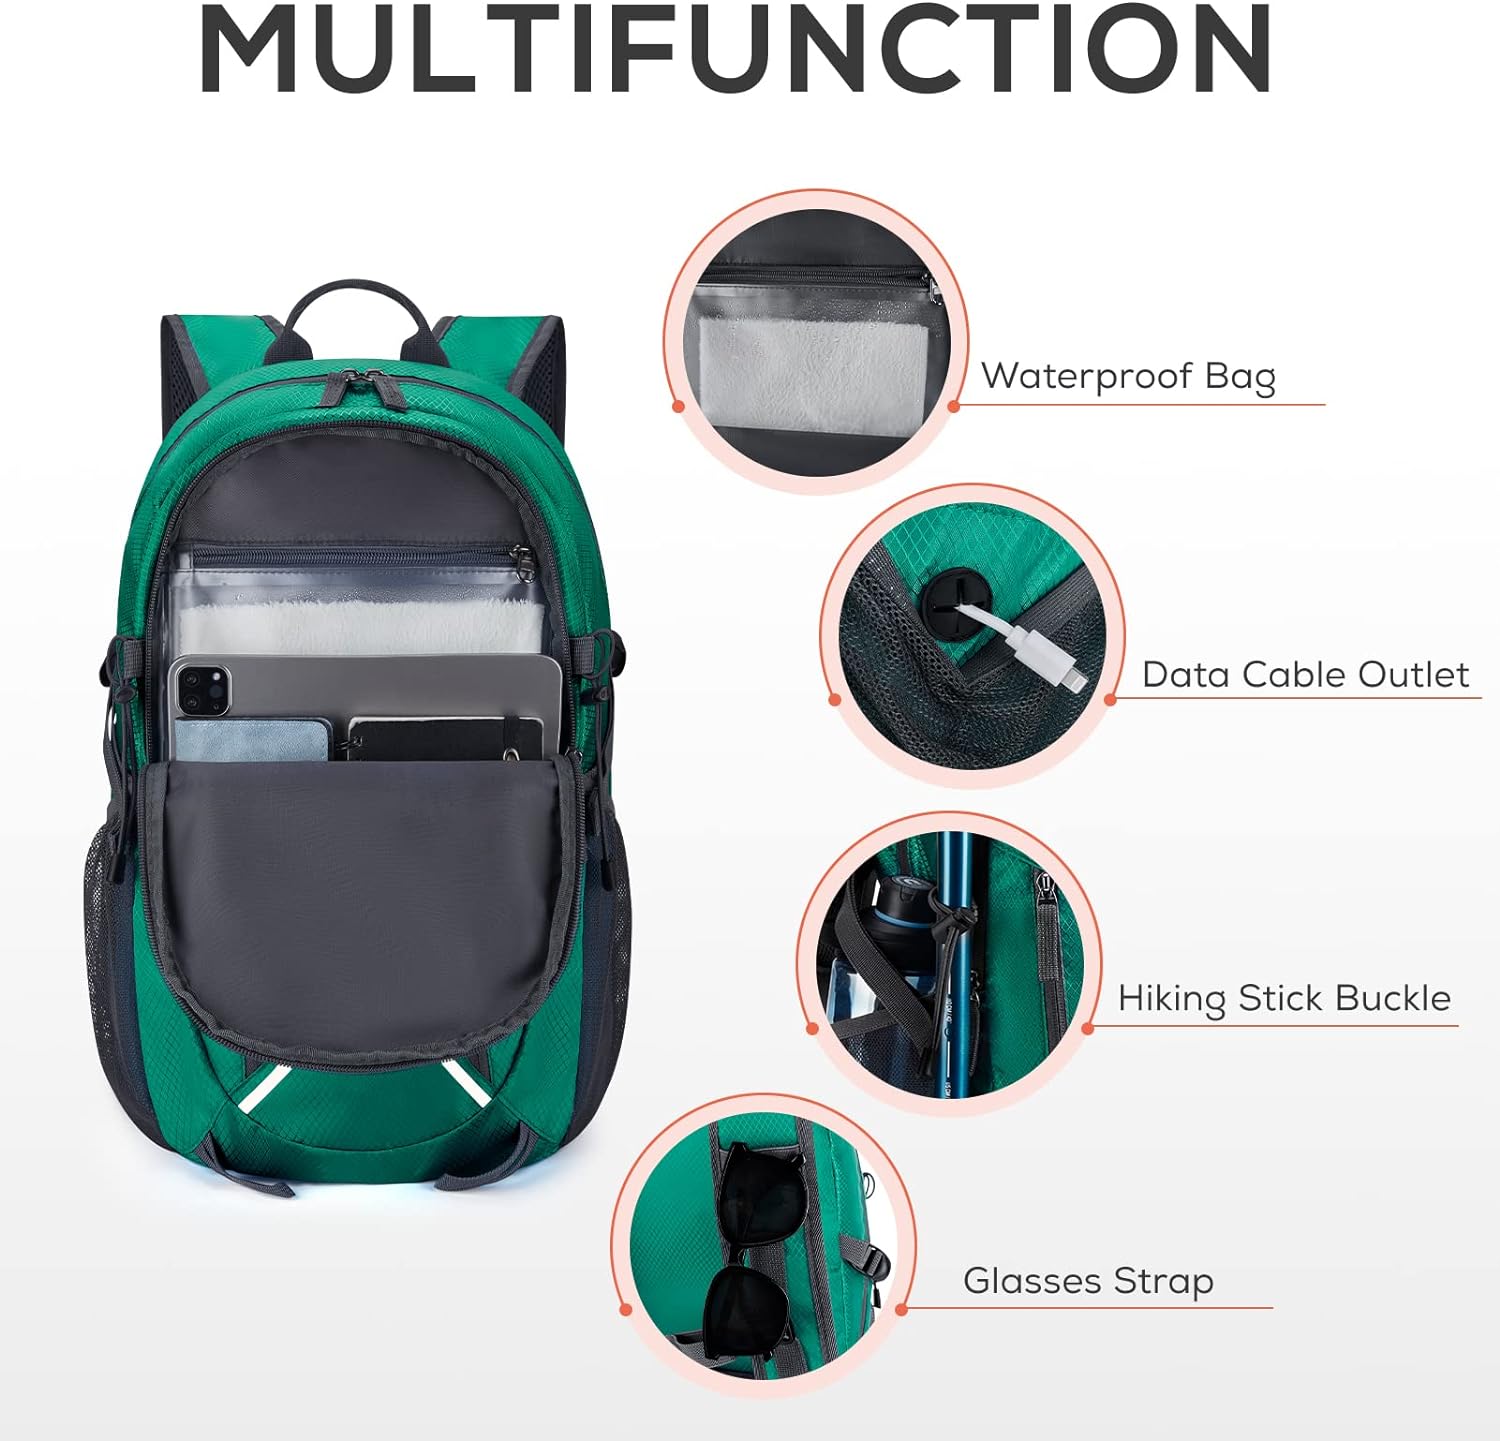 TOURIT Hiking Backpack 40L Lightweight Hiking Daypack Foldable Waterproof Camping Backpack for Women Men Travel Outdoor Green